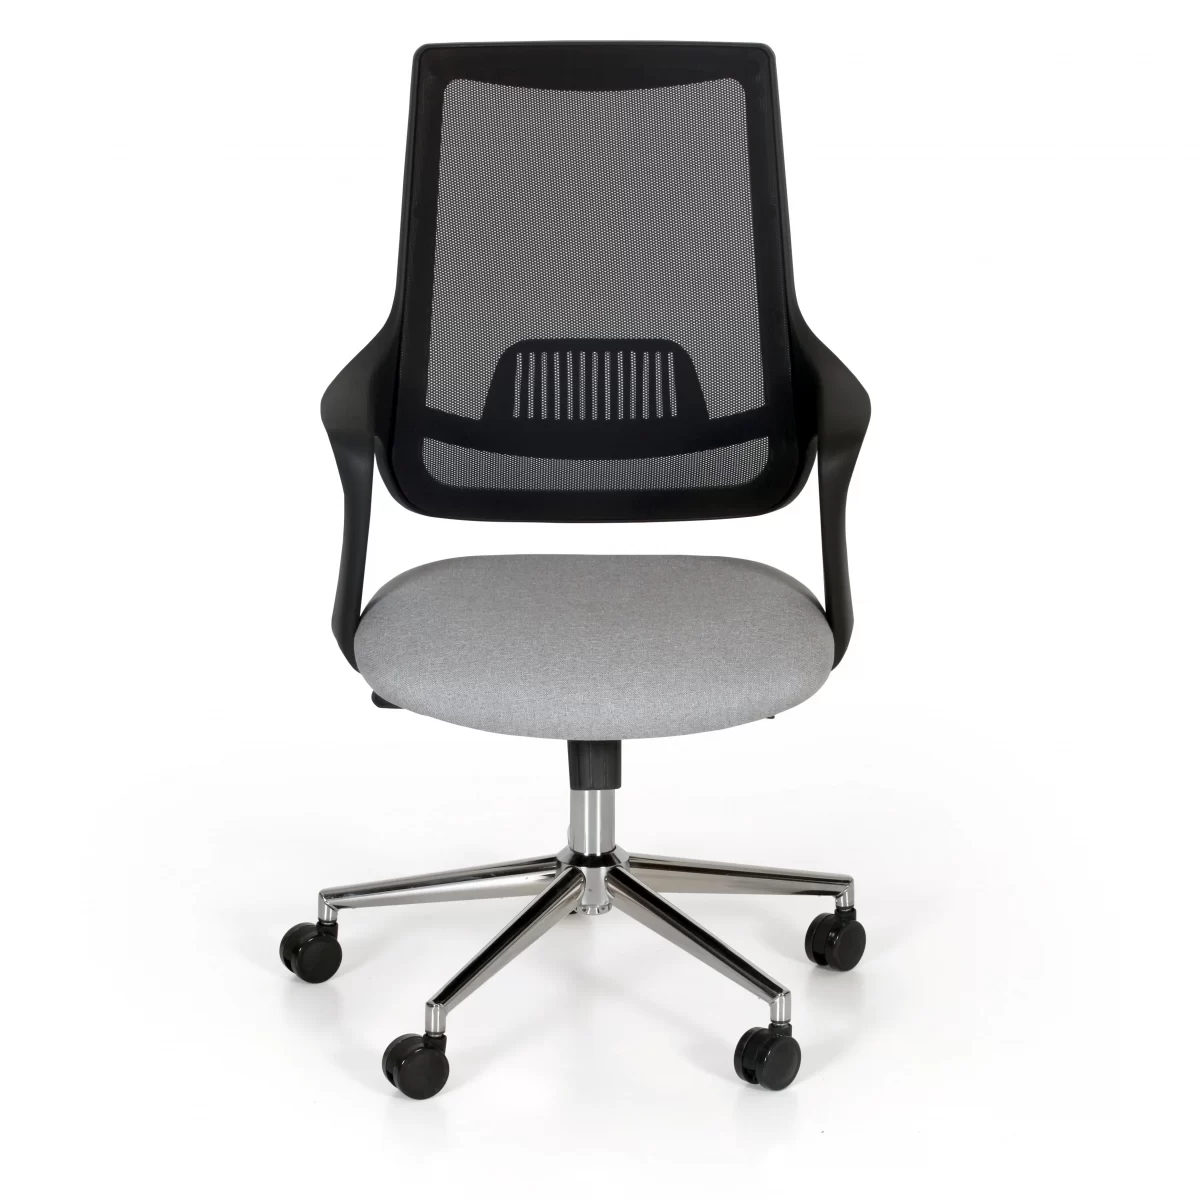 Thomas Ch Manager Office Chair Chrome Legs scaled